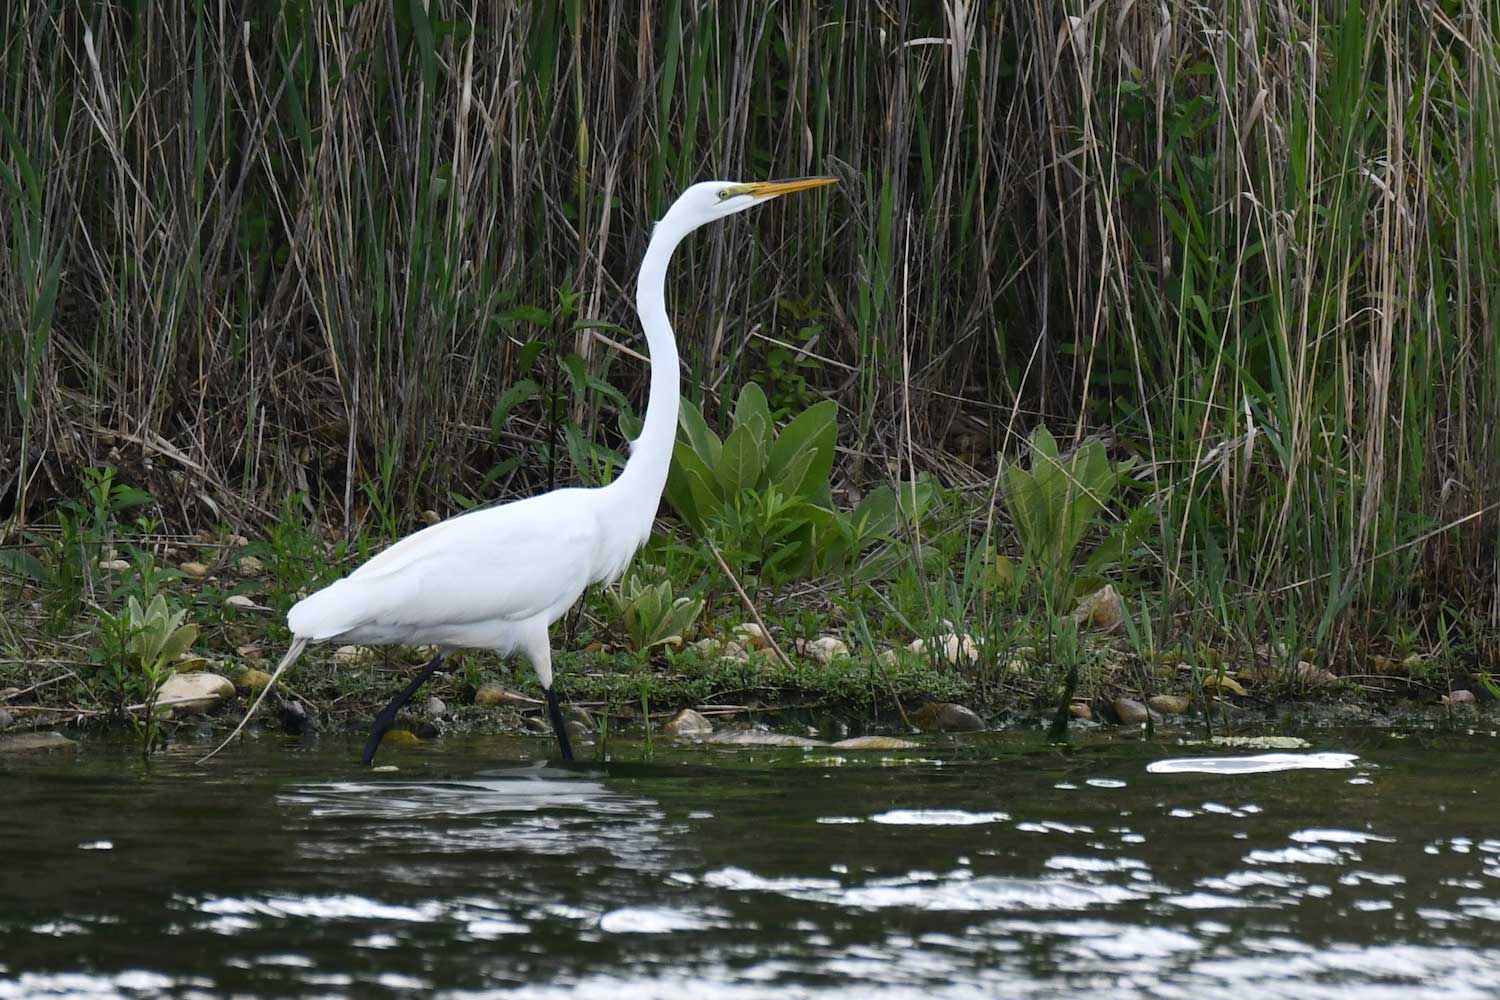 A great egret walking in shallow water.